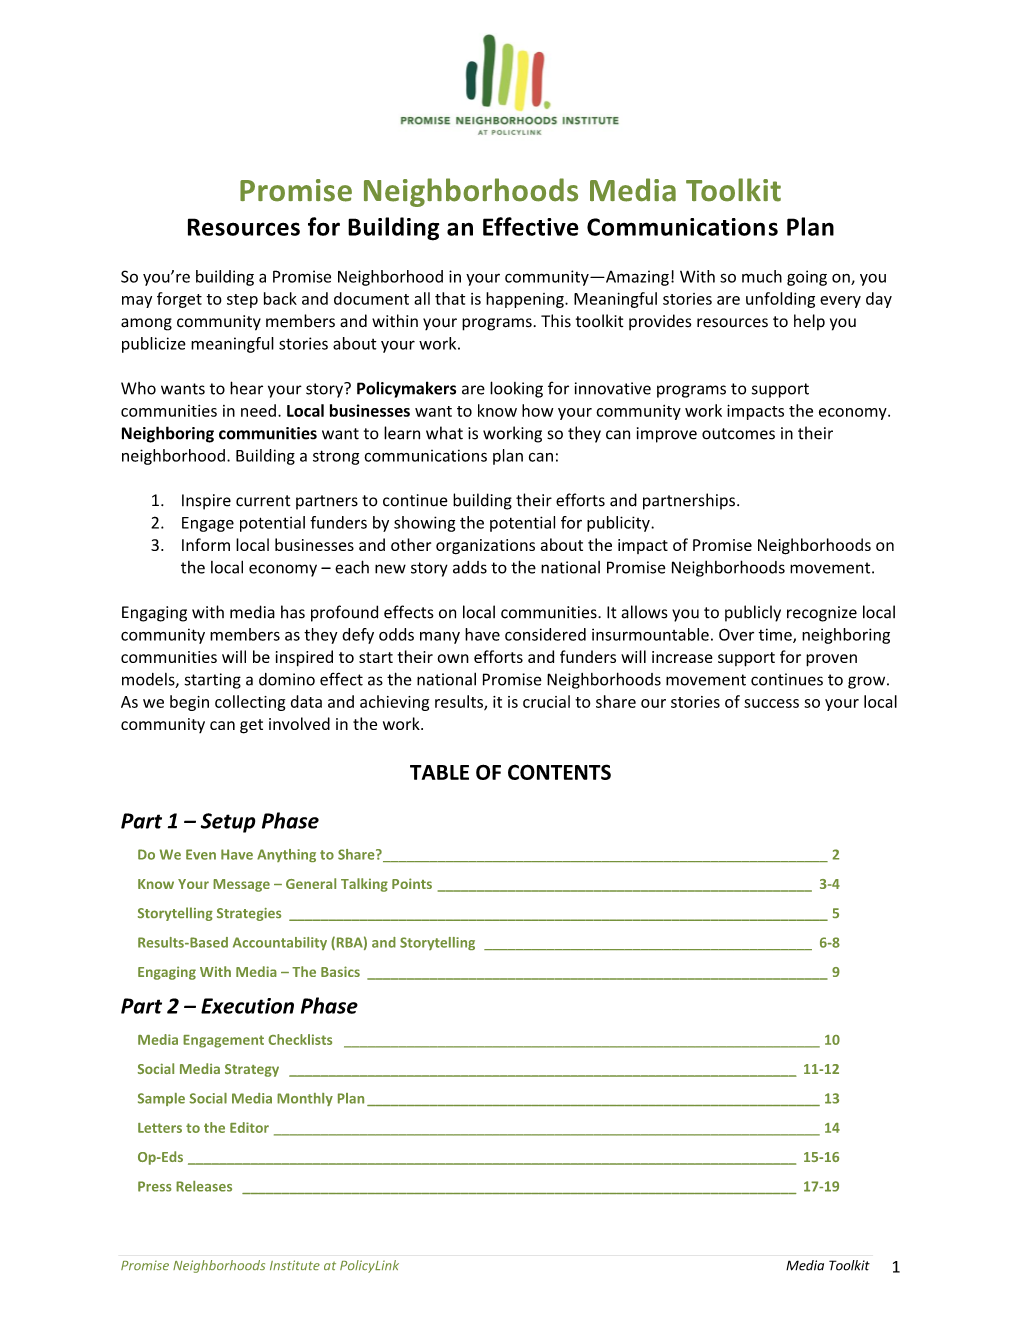 Promise Neighborhoods Media Toolkit Resources for Building an Effective Communications Plan